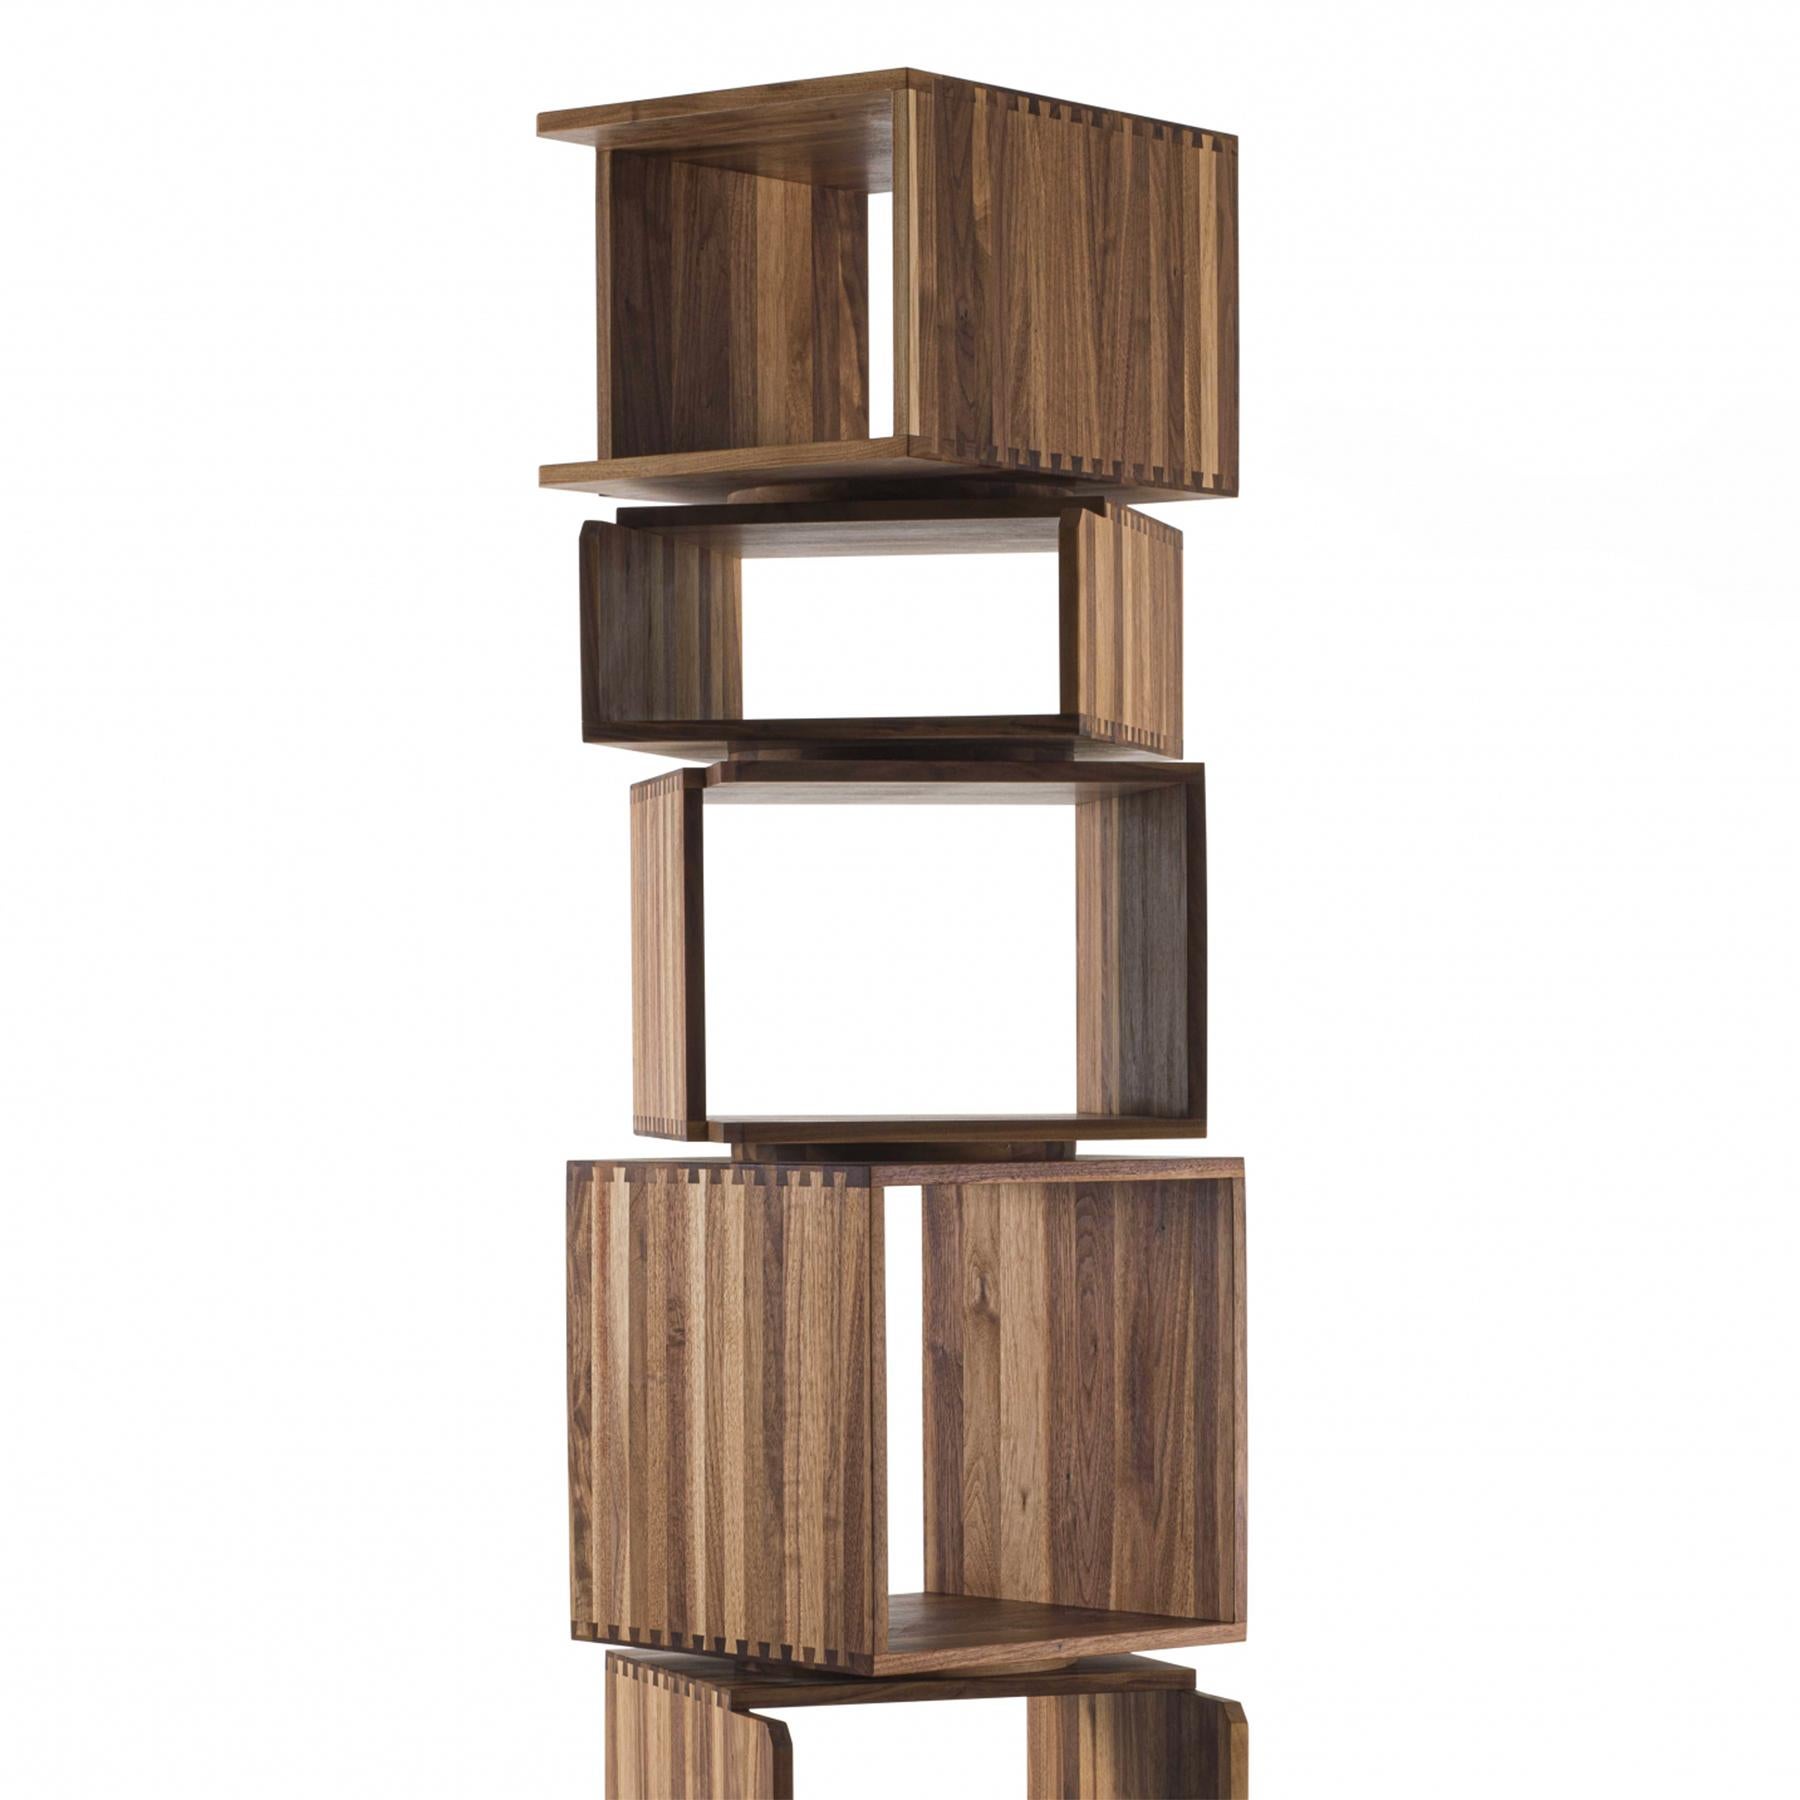 Bookcase free round with solid walnut wood structure, 
with 7 modules stacked in a bookcase column on a swivel base.
Each element's amde with dovetails joints in solid wood, 15mm thickness.